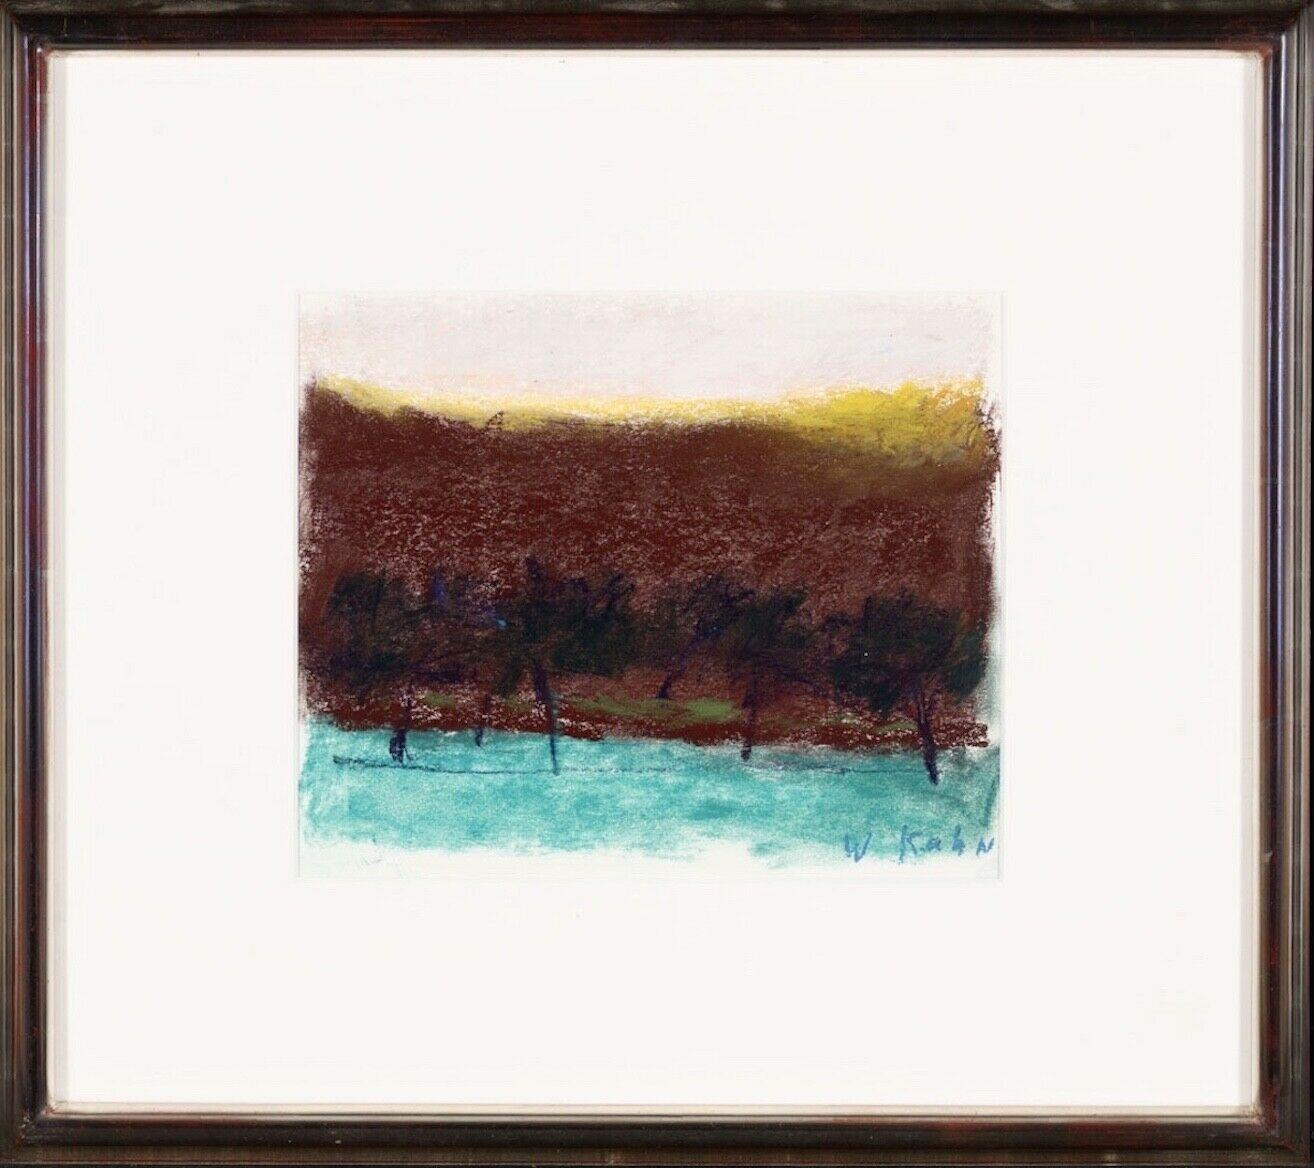 Artist: Wolf Kahn (1927)
Title: Trees Against Brown Background
Year: 2000
Medium: Pastel on paper
Size: 8 x 10 inches (sheet); 16 x 18 inches (frame)
Condition: Excellent
Inscription: Signed by the artist

WOLF KAHN (1927-  ) Celebrated abstract